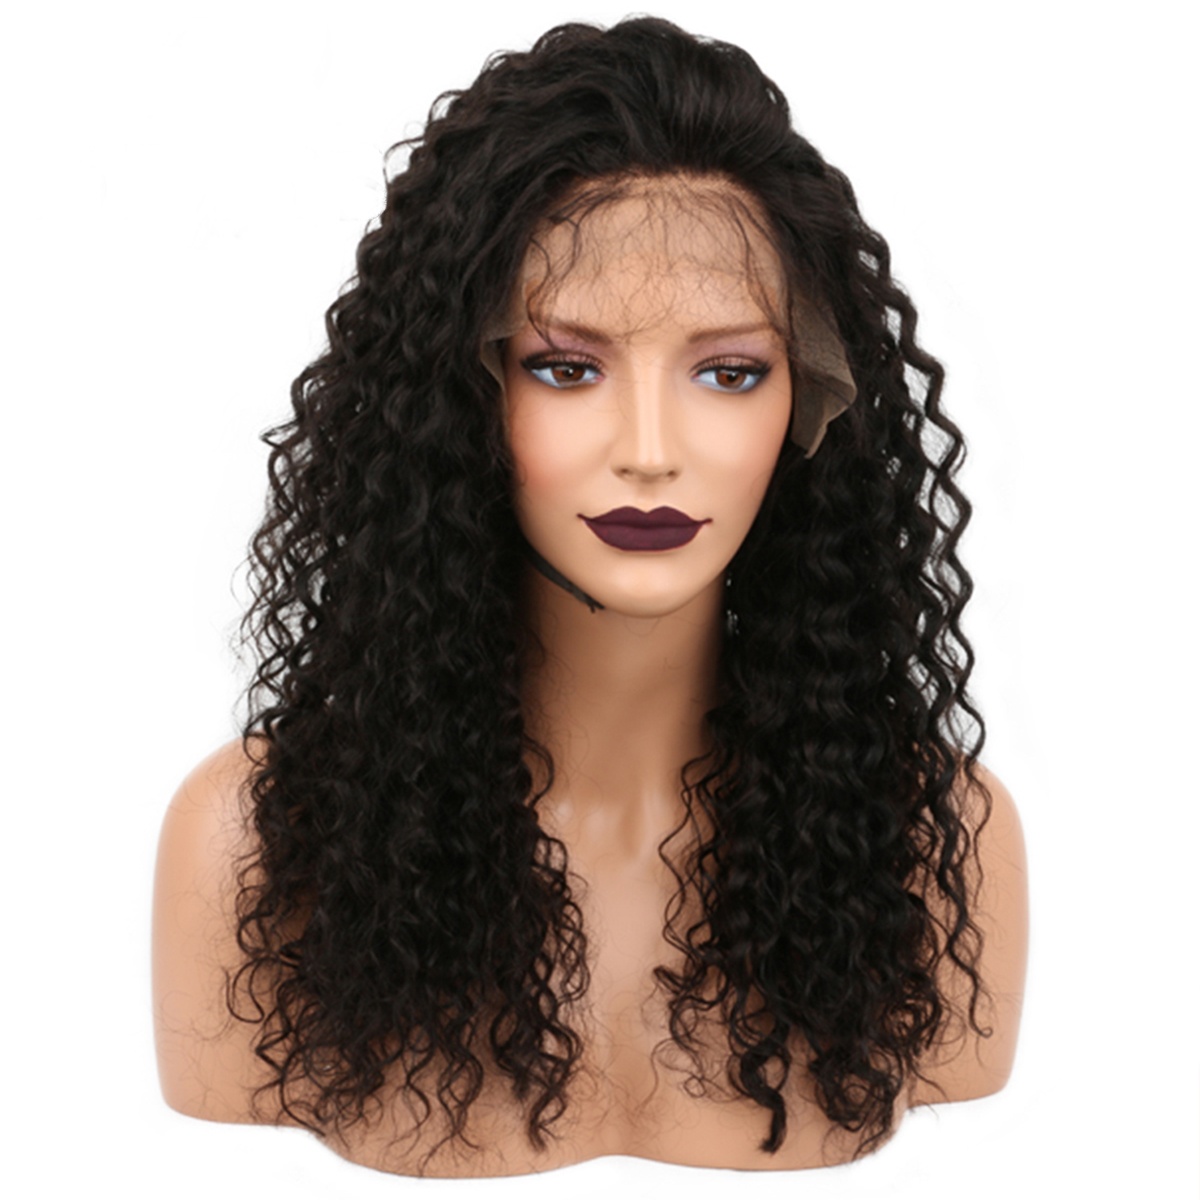 Lace Front Human Hair Wigs With Baby Hair Brazilian Remy Kinky Curly Wigs For Black Women